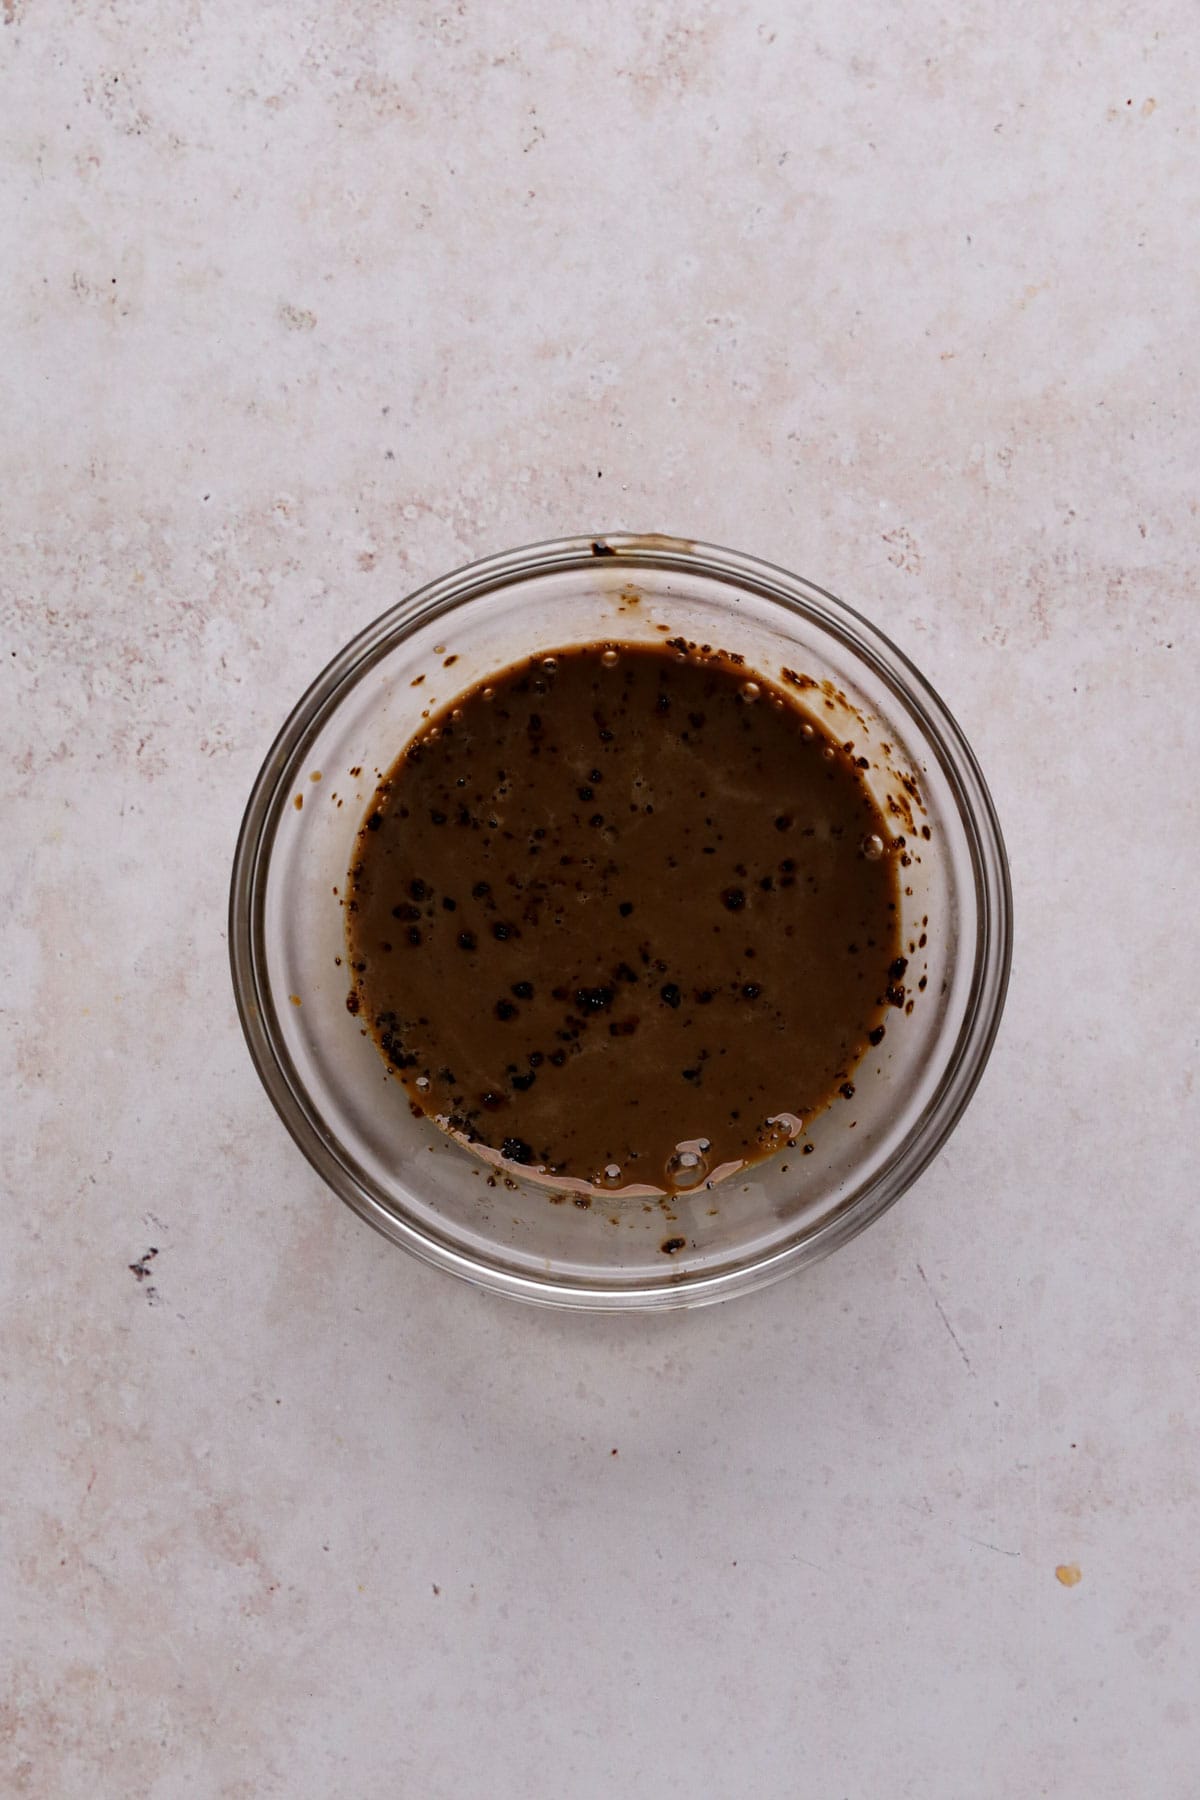 Instant coffee dissolved in cream in a small glass bowl.